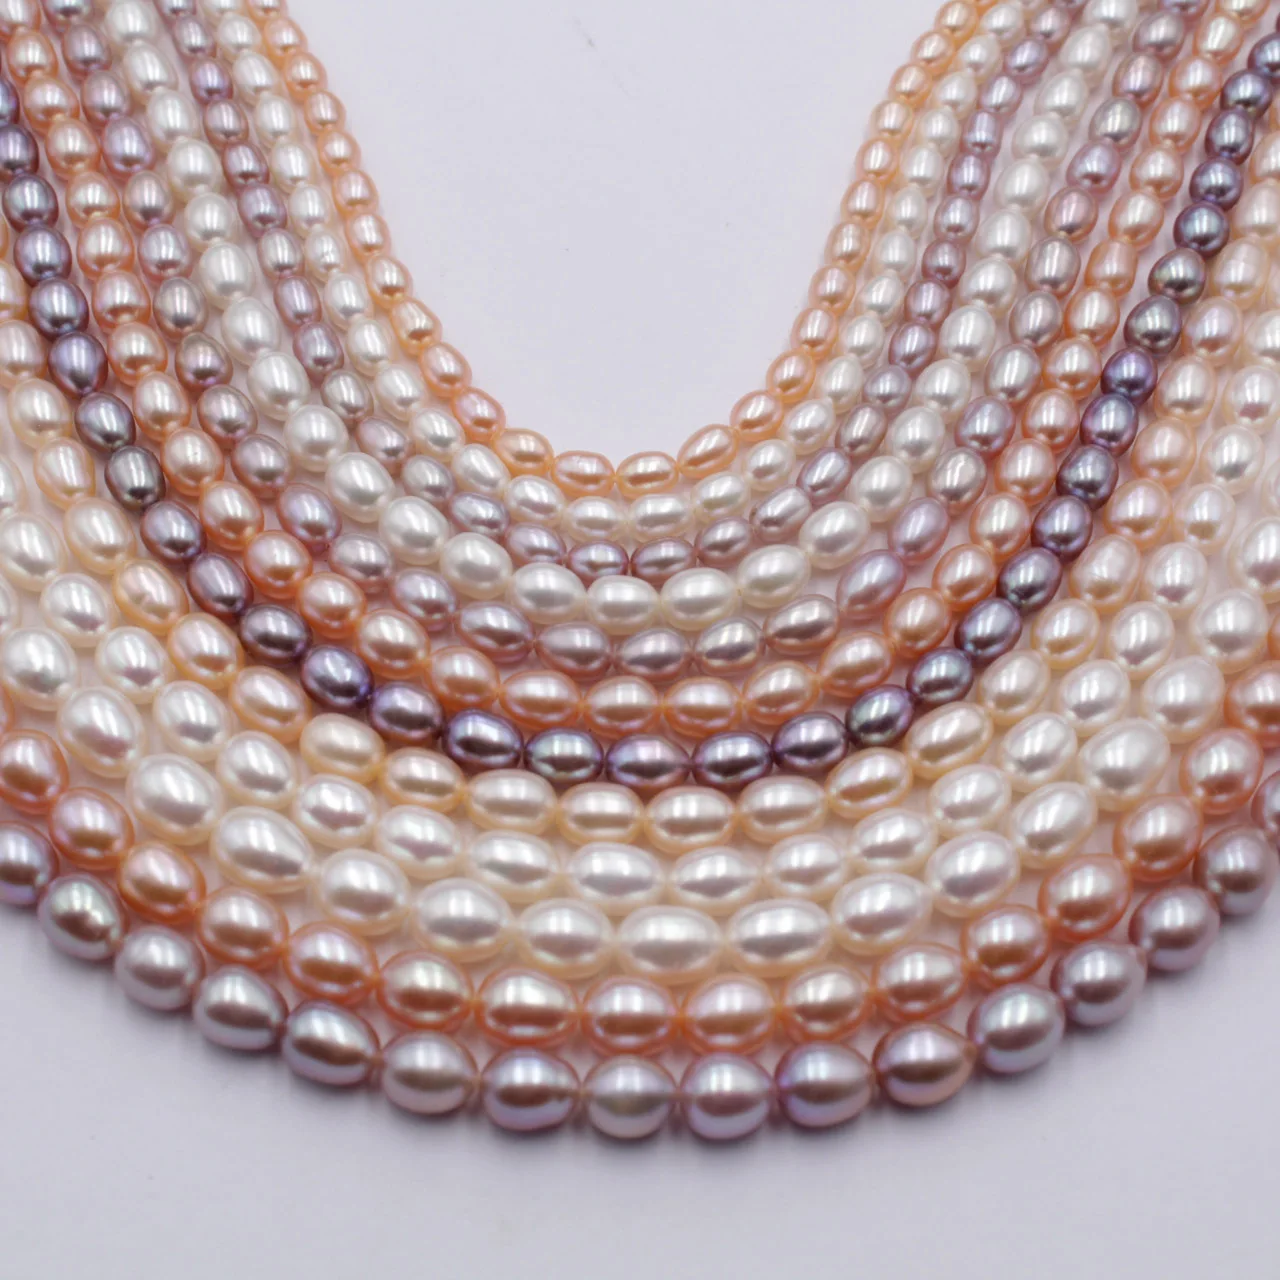 

New Arrival 2-9mm Bright Light Rice-Shaped Natural Freshwater Cultured Pearls Handmade DIY Semi-Finished Jewelry Material